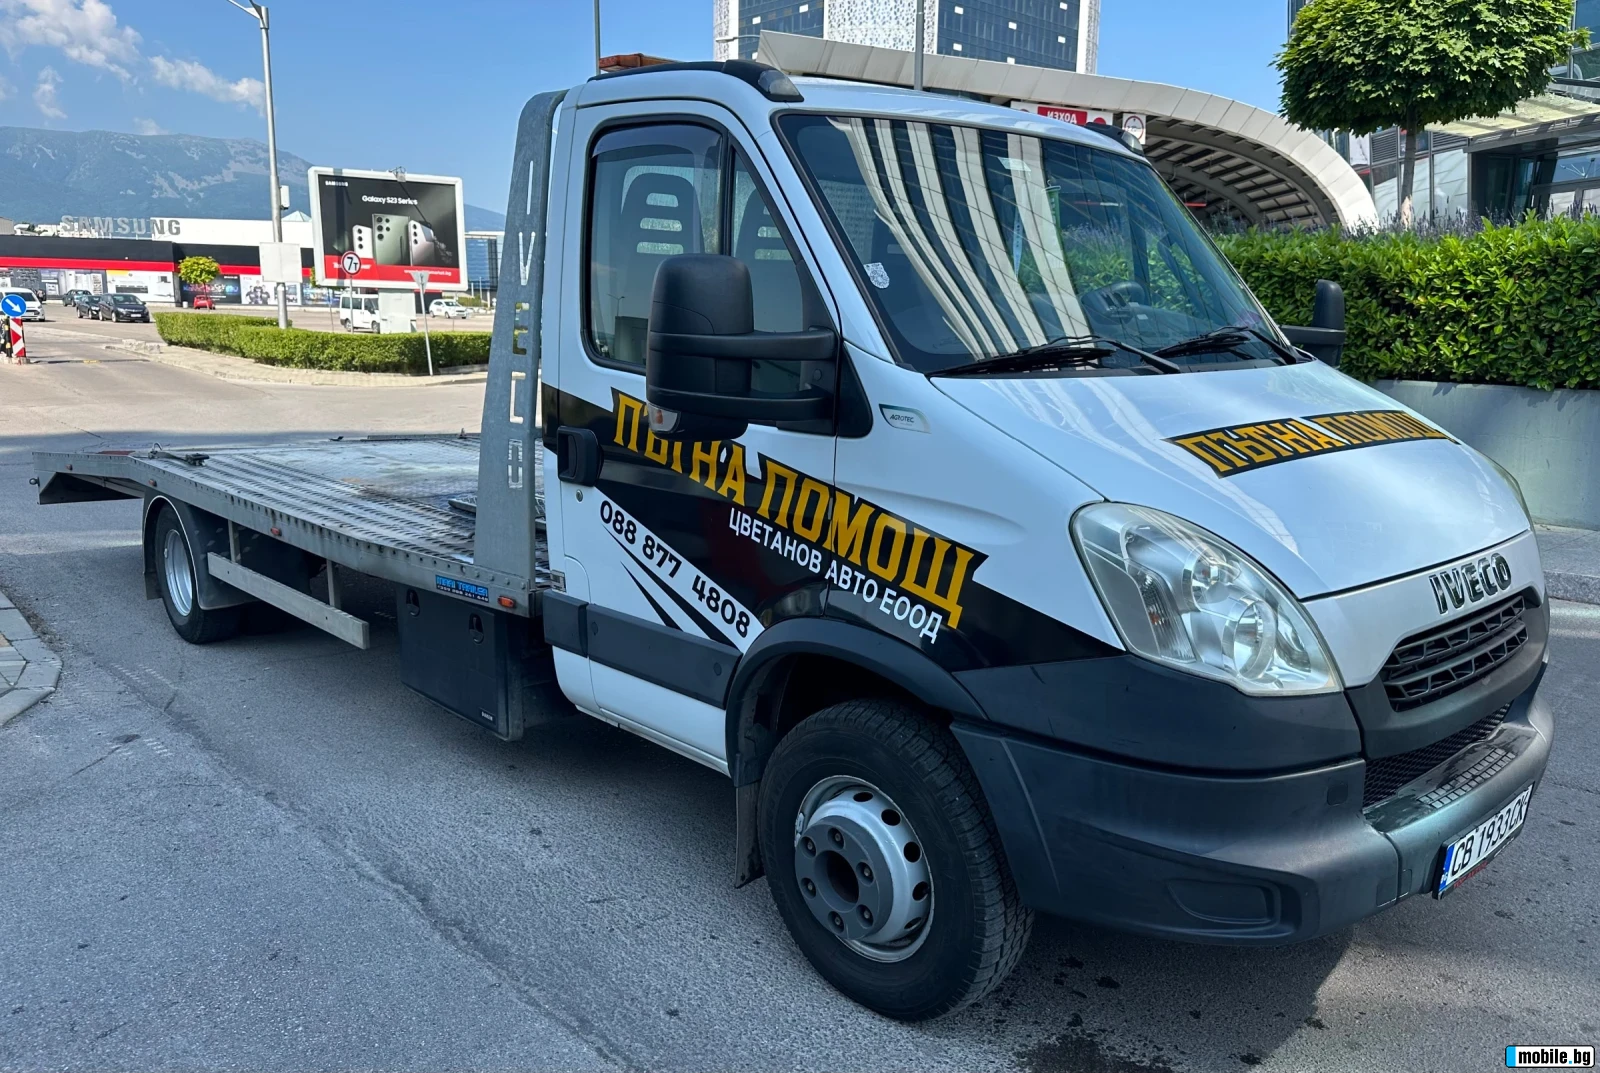 Iveco Daily 65C17/3.0D/6ck/!/ /6.10 | Mobile.bg   3